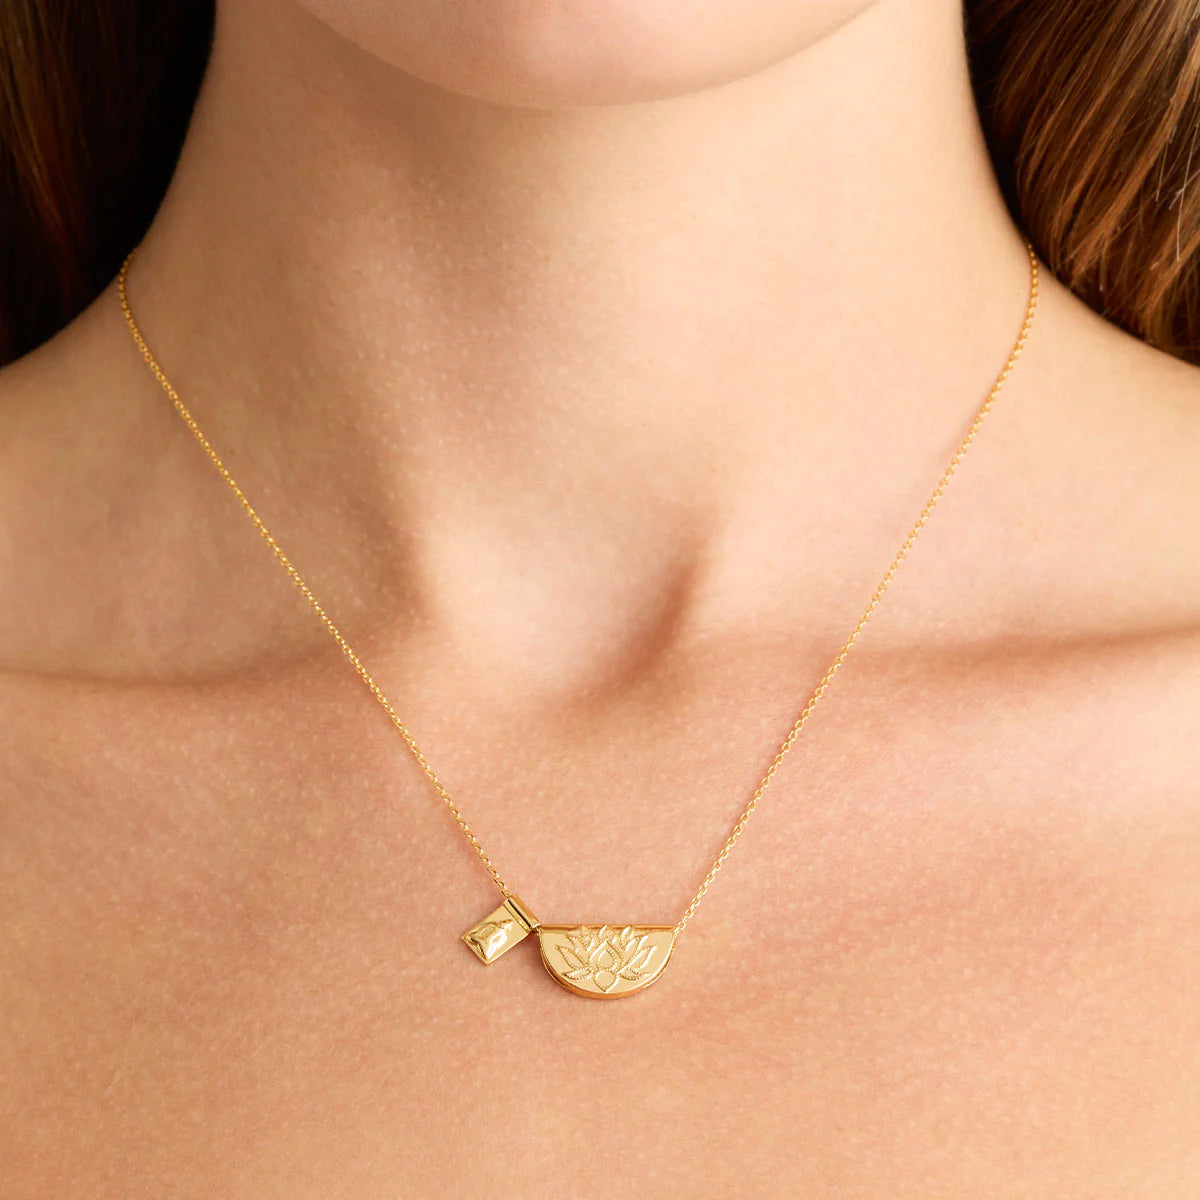 LOTUS AND LITTLE BUDDHA NECKLACE -18K GOLD VERMEIL - BY CHARLOTTE